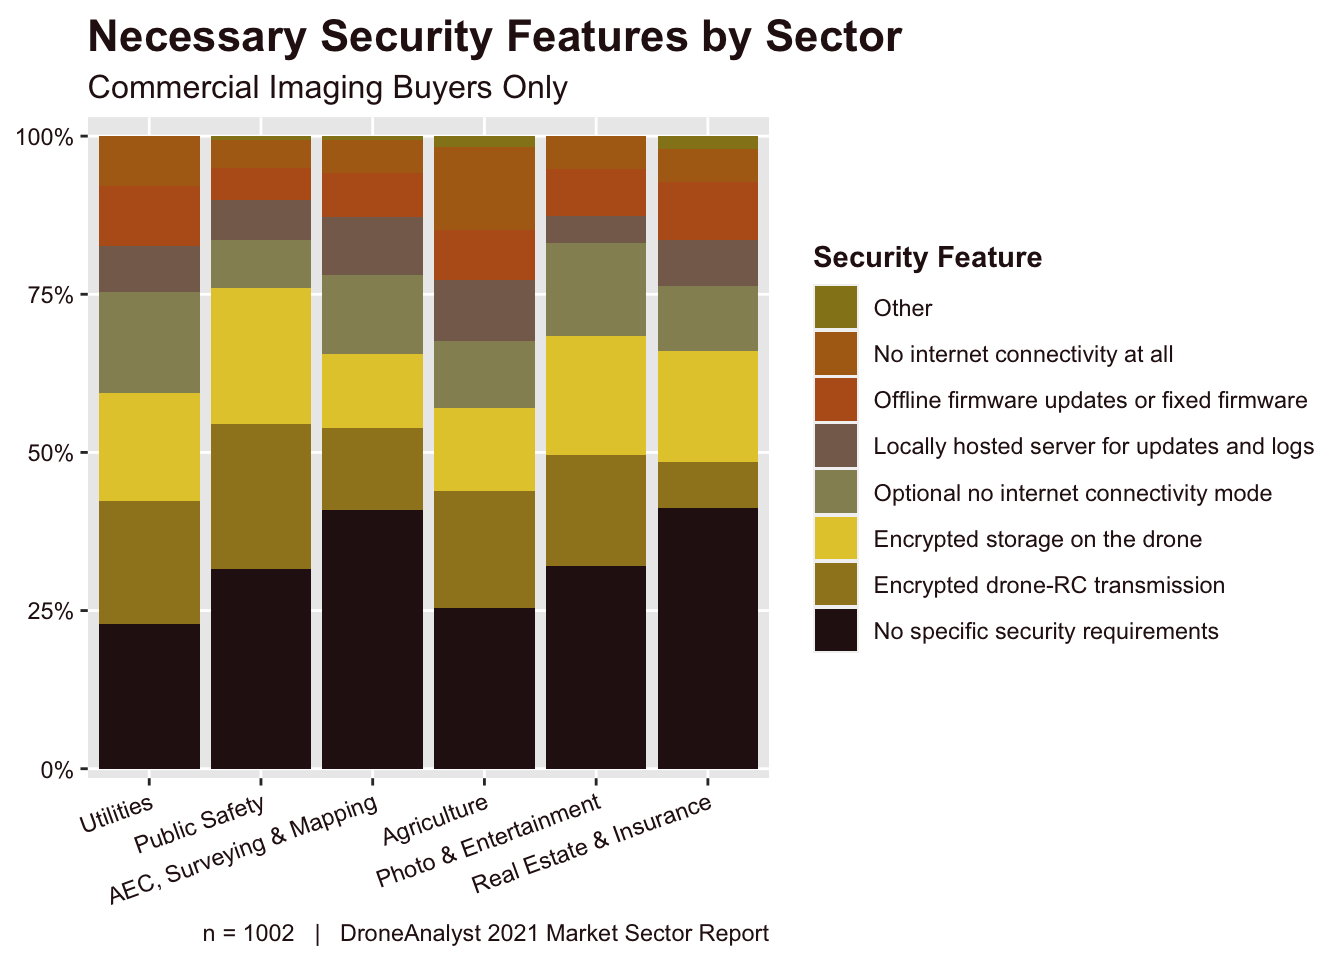 Necessary Security Features by Sector